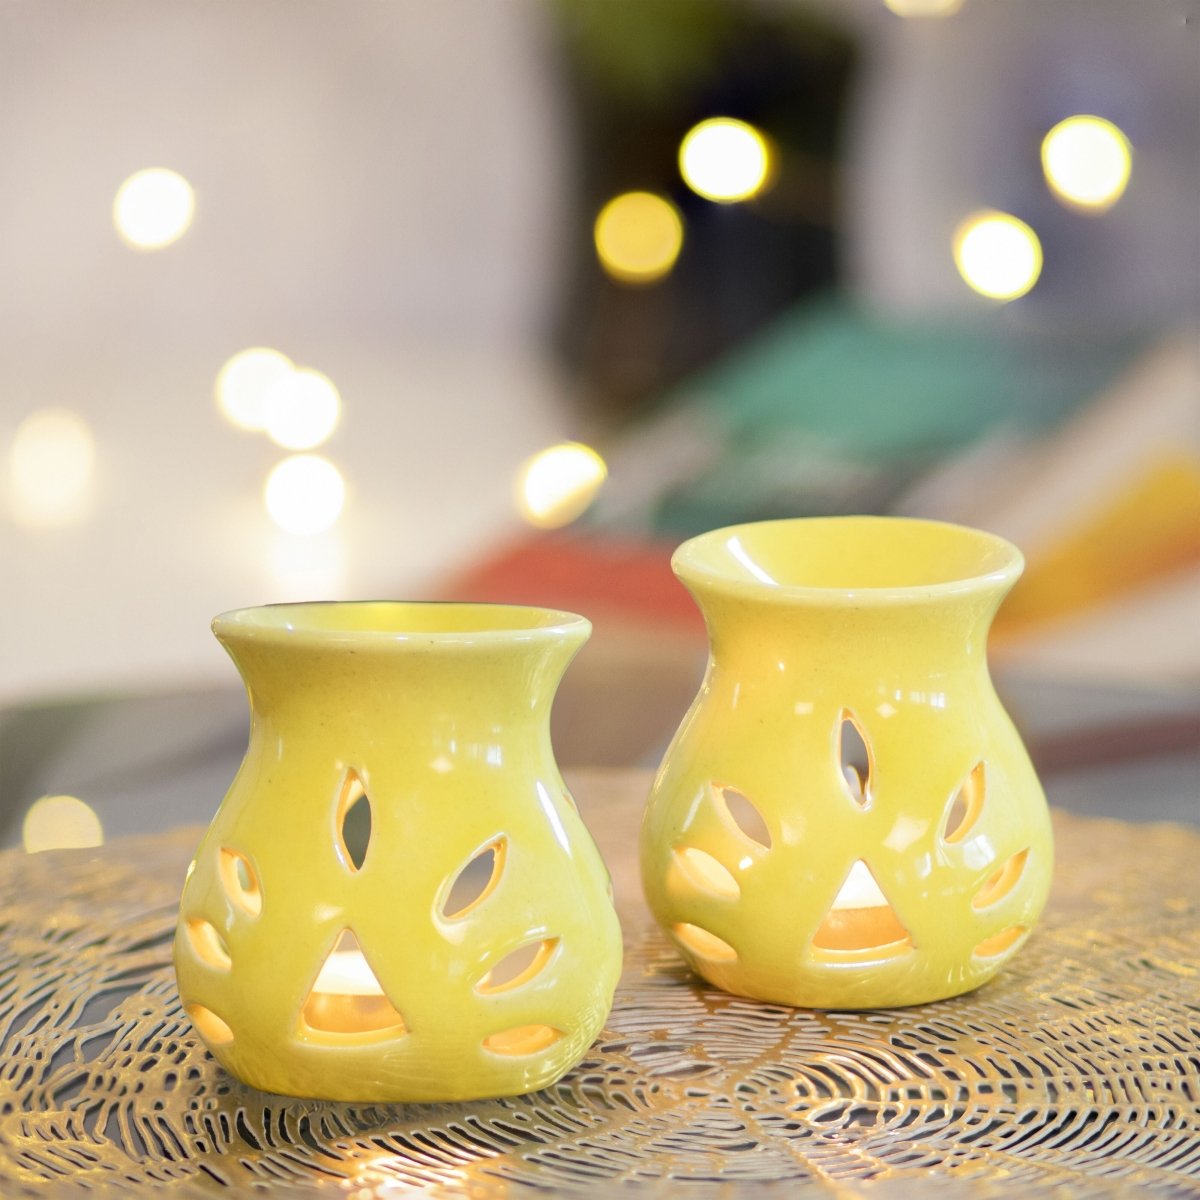 Kezevel Ceramic Tealight Candle Aroma Burner - Set of 2 Handcrafted Aroma Diffuser with Tealight Candle for Home Decoration